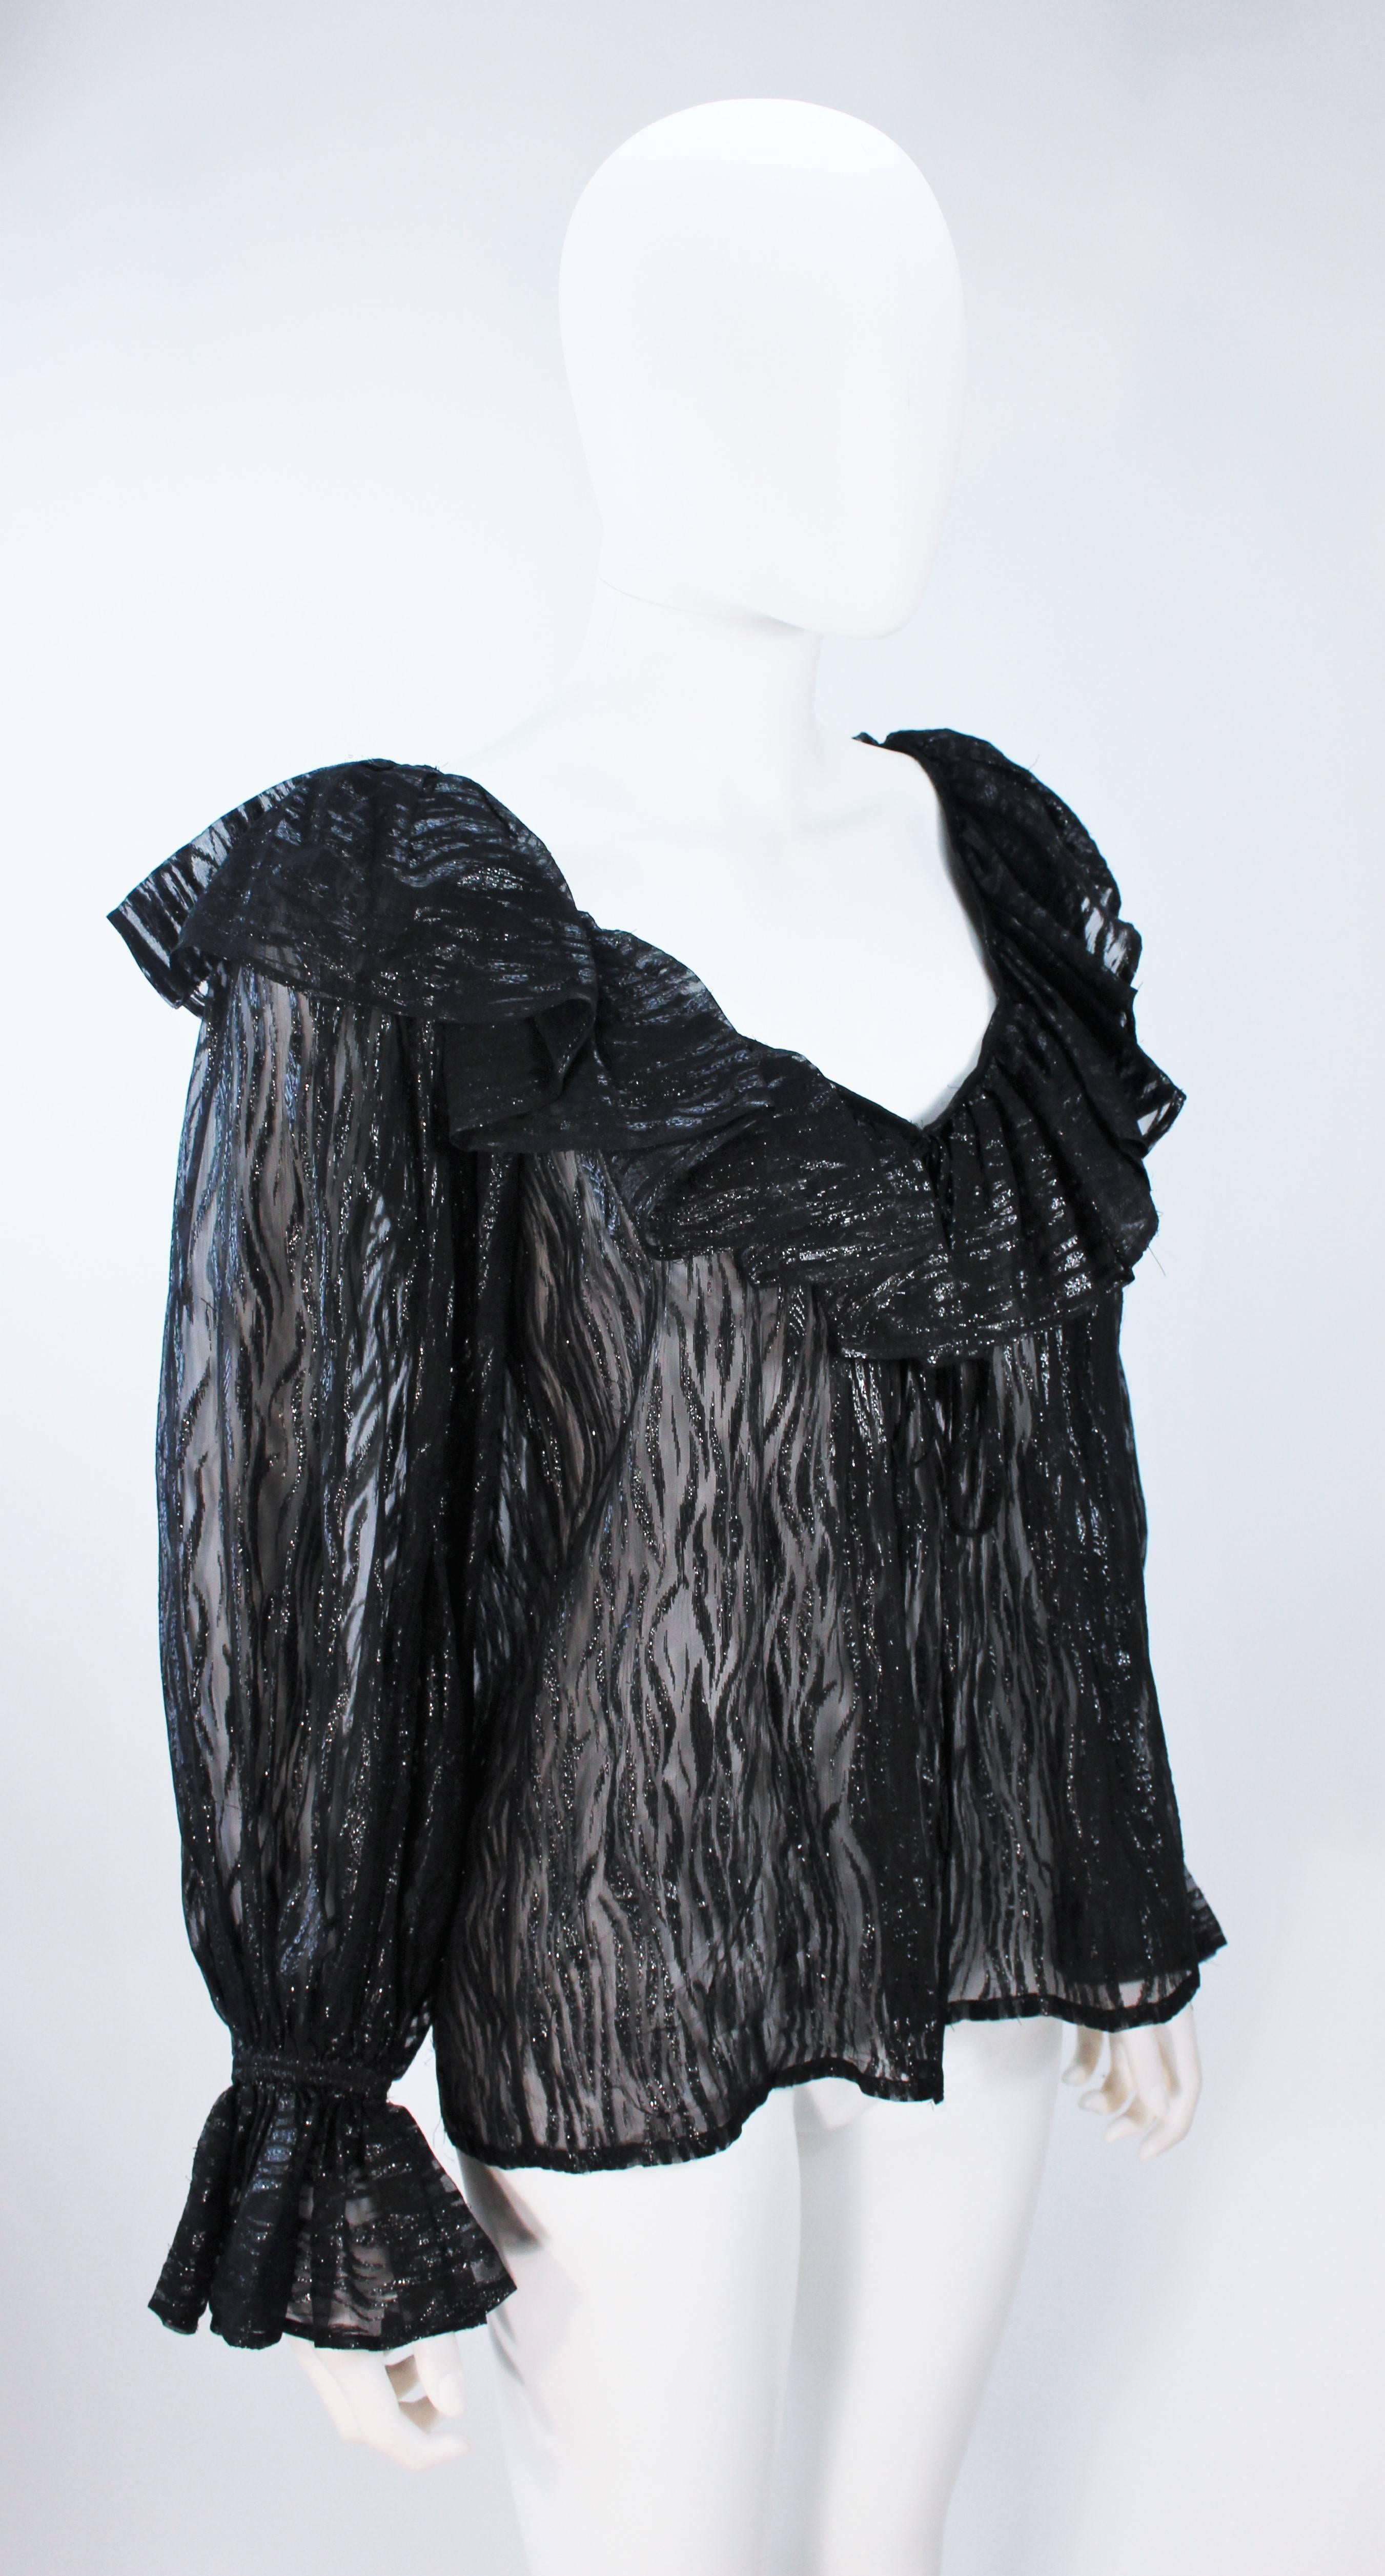 YVES SAINT LAURENT Black Printed Sheer Silk Blouse with Fuzzy Lame Size 4-6 1